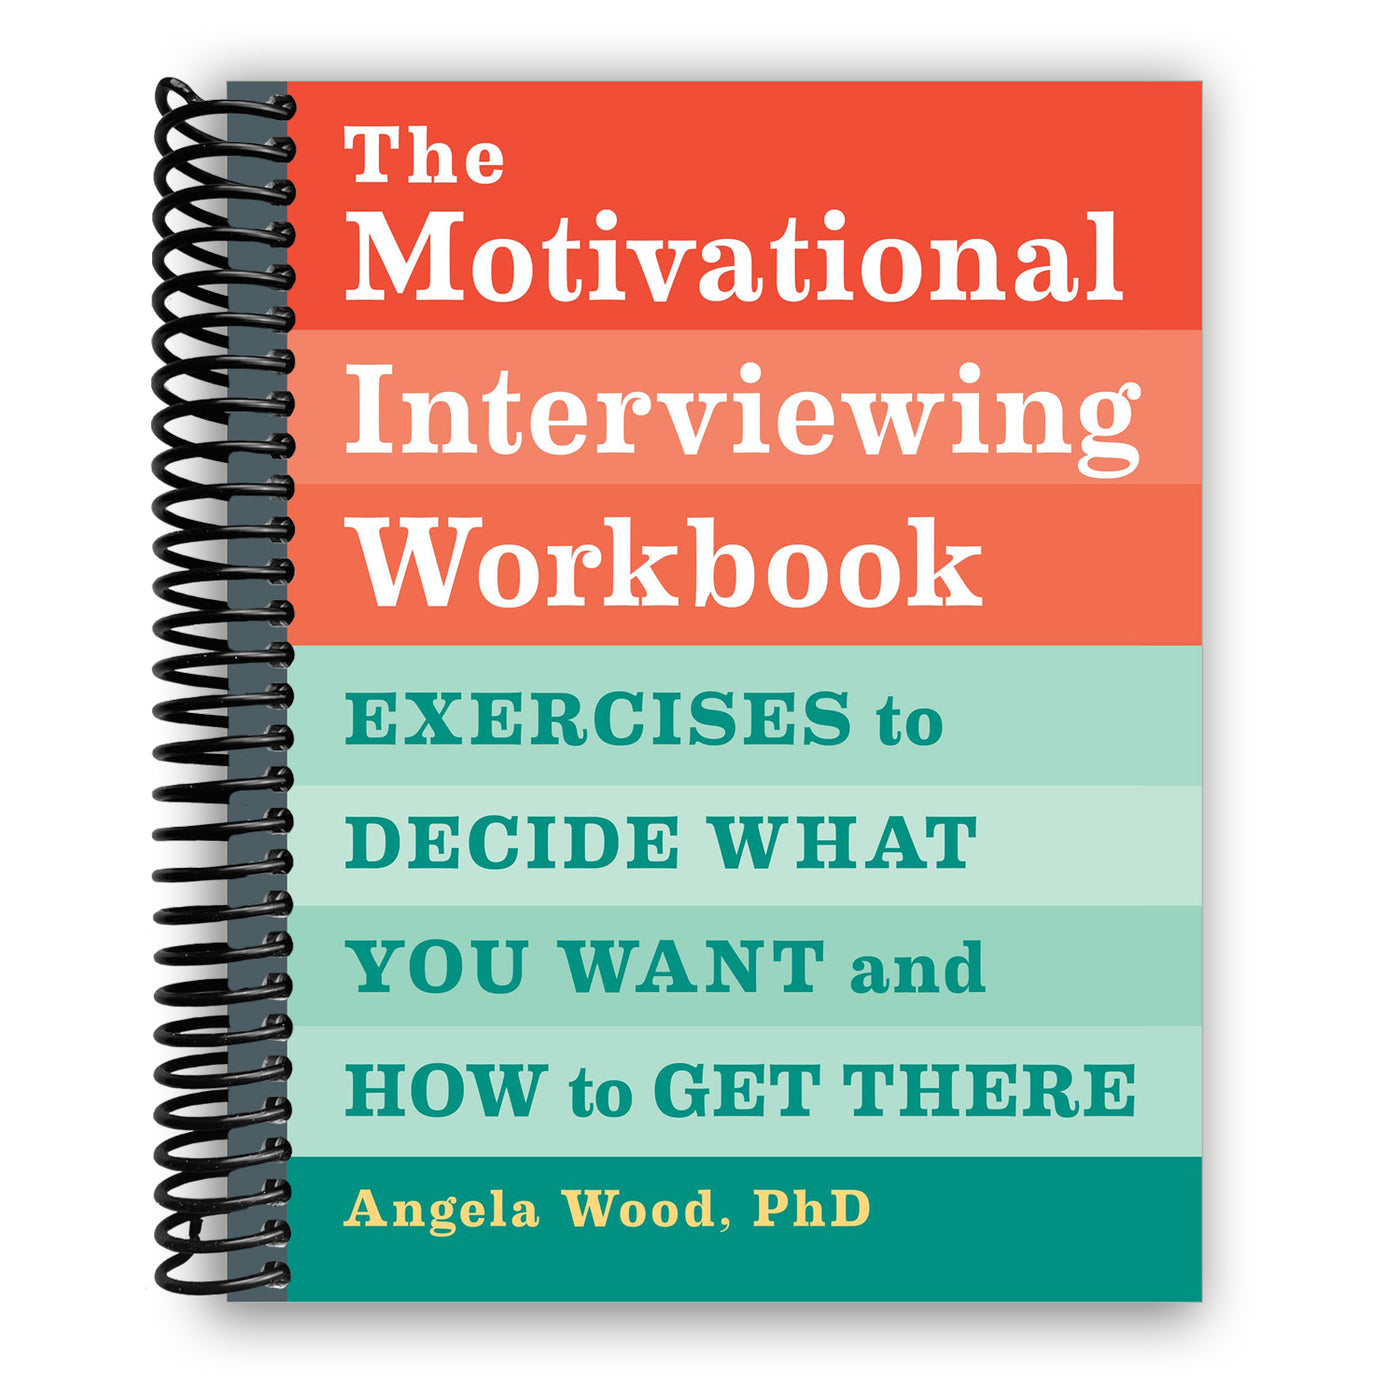 The Motivational Interviewing Workbook: Exercises to Decide What You Want and How to Get There (Spiral Bound)